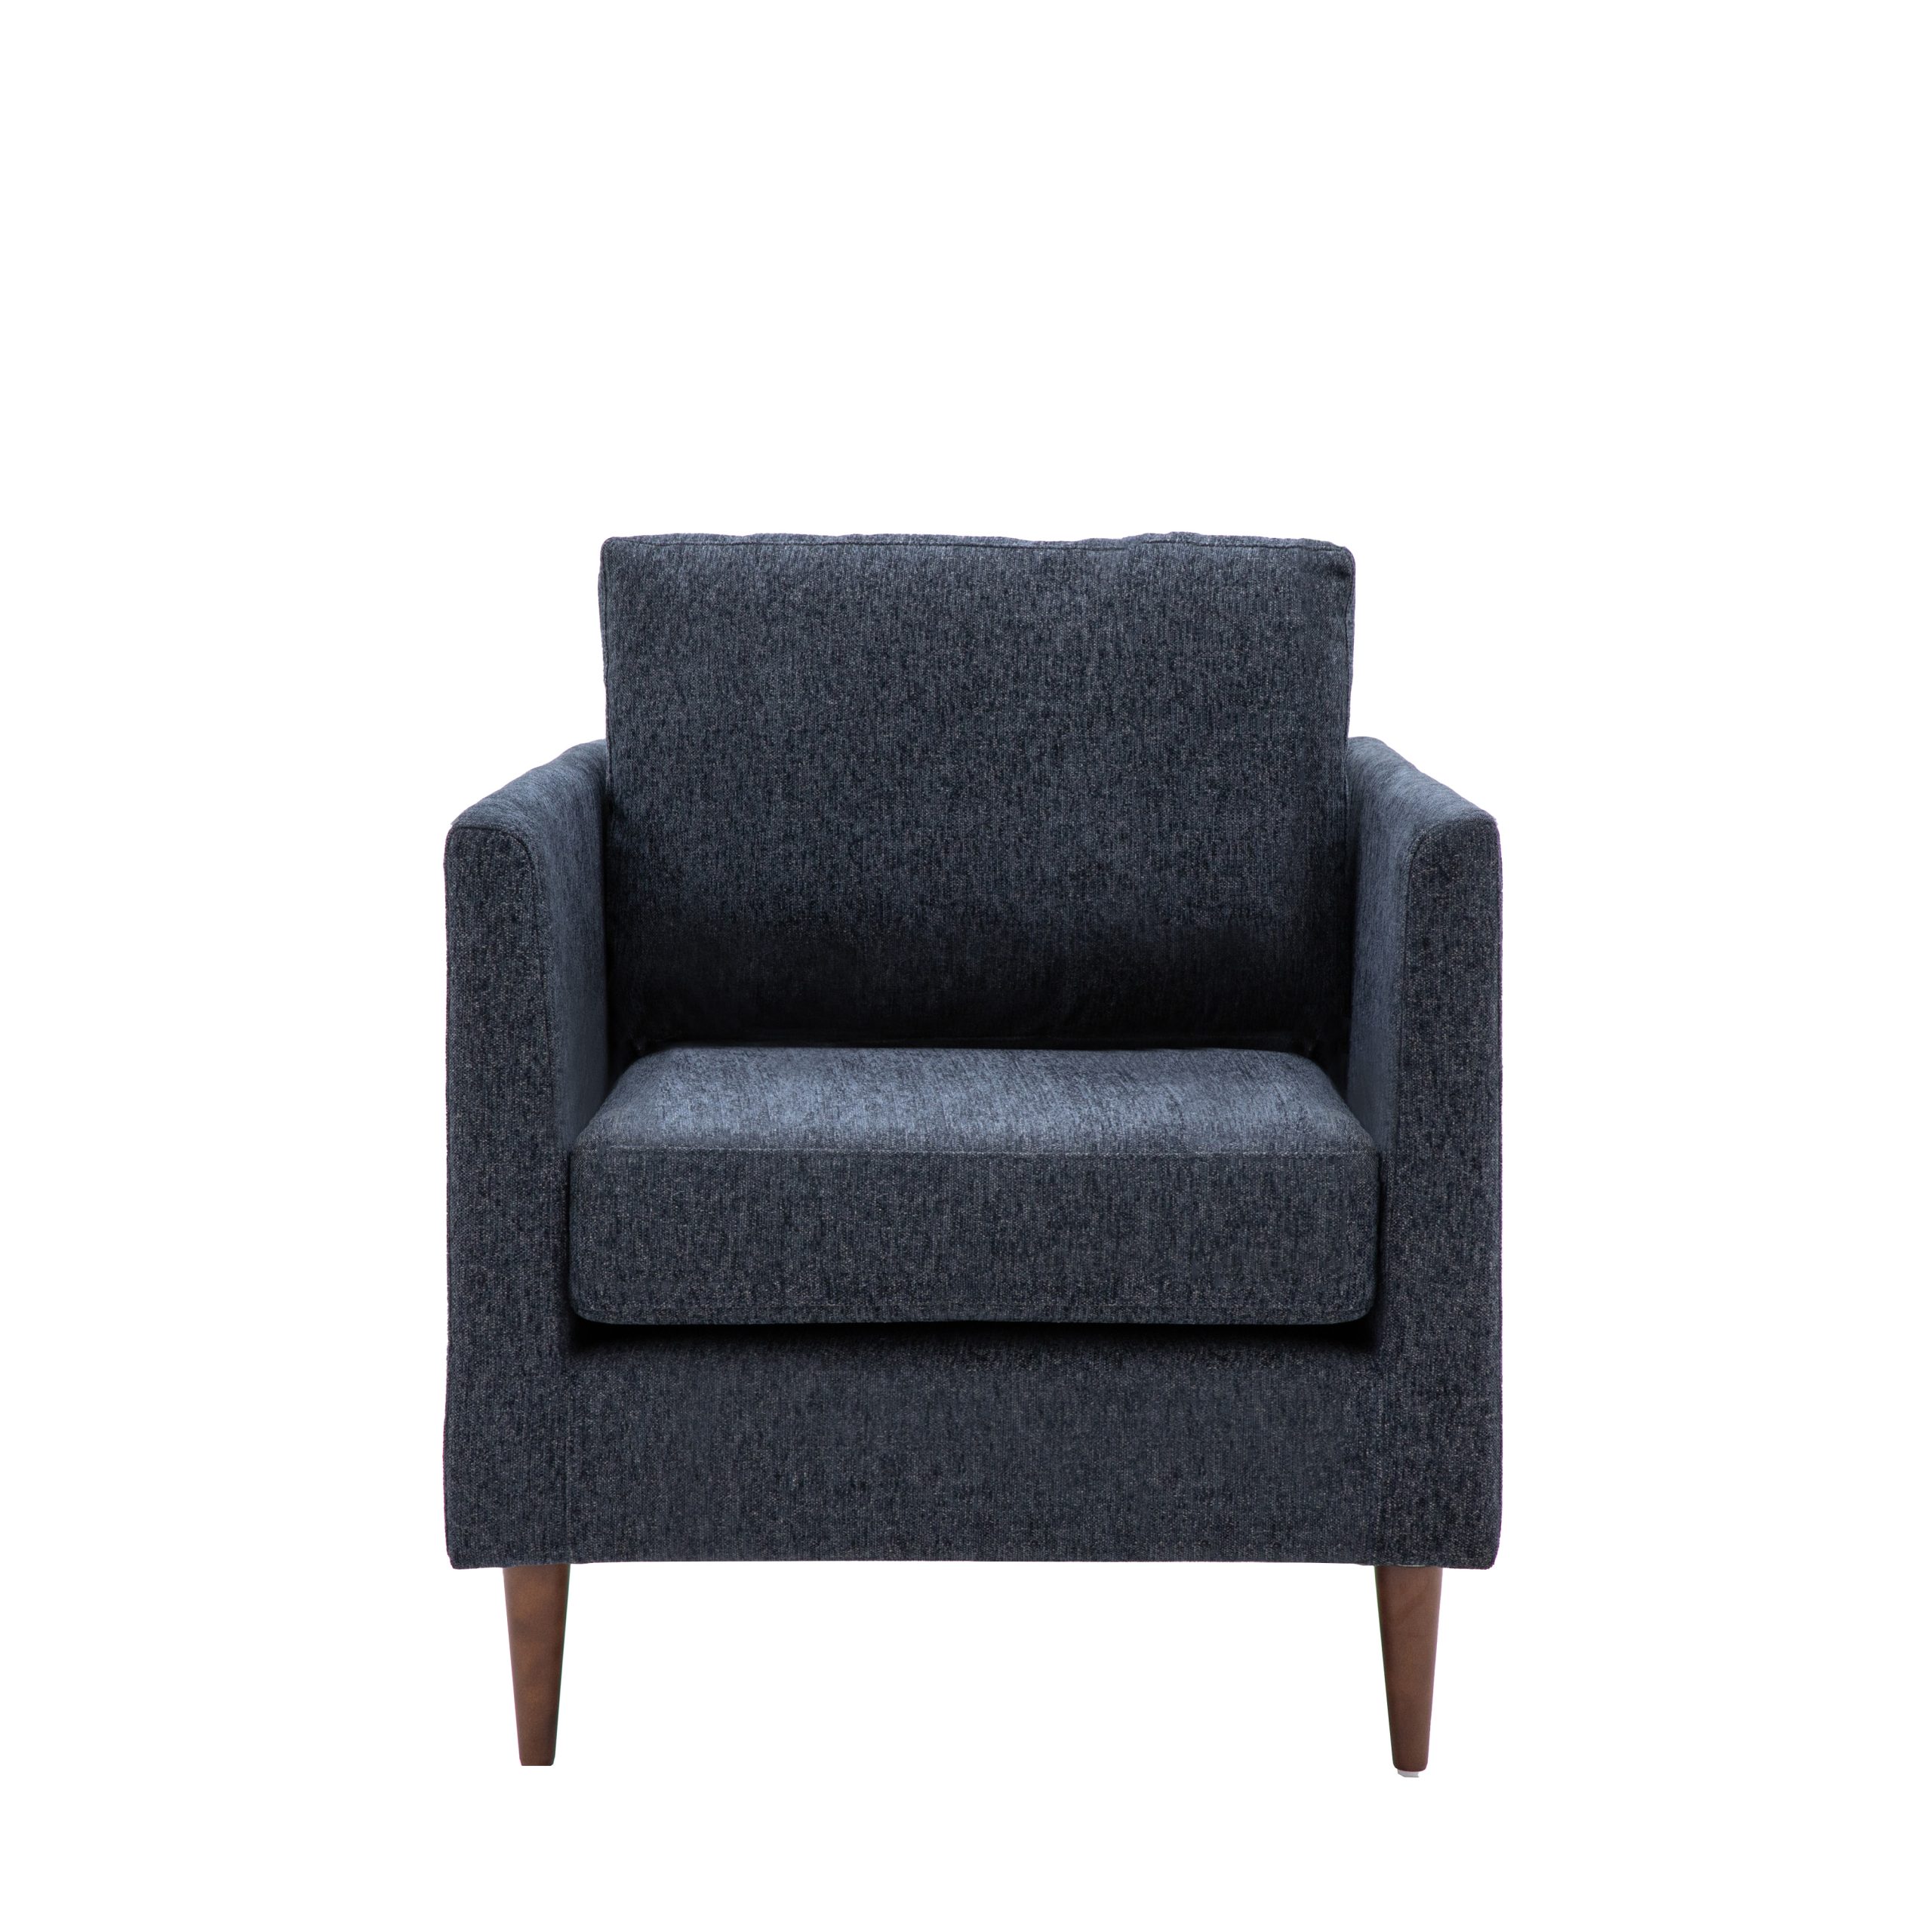 Gallery Direct Gateford Armchair Charcoal